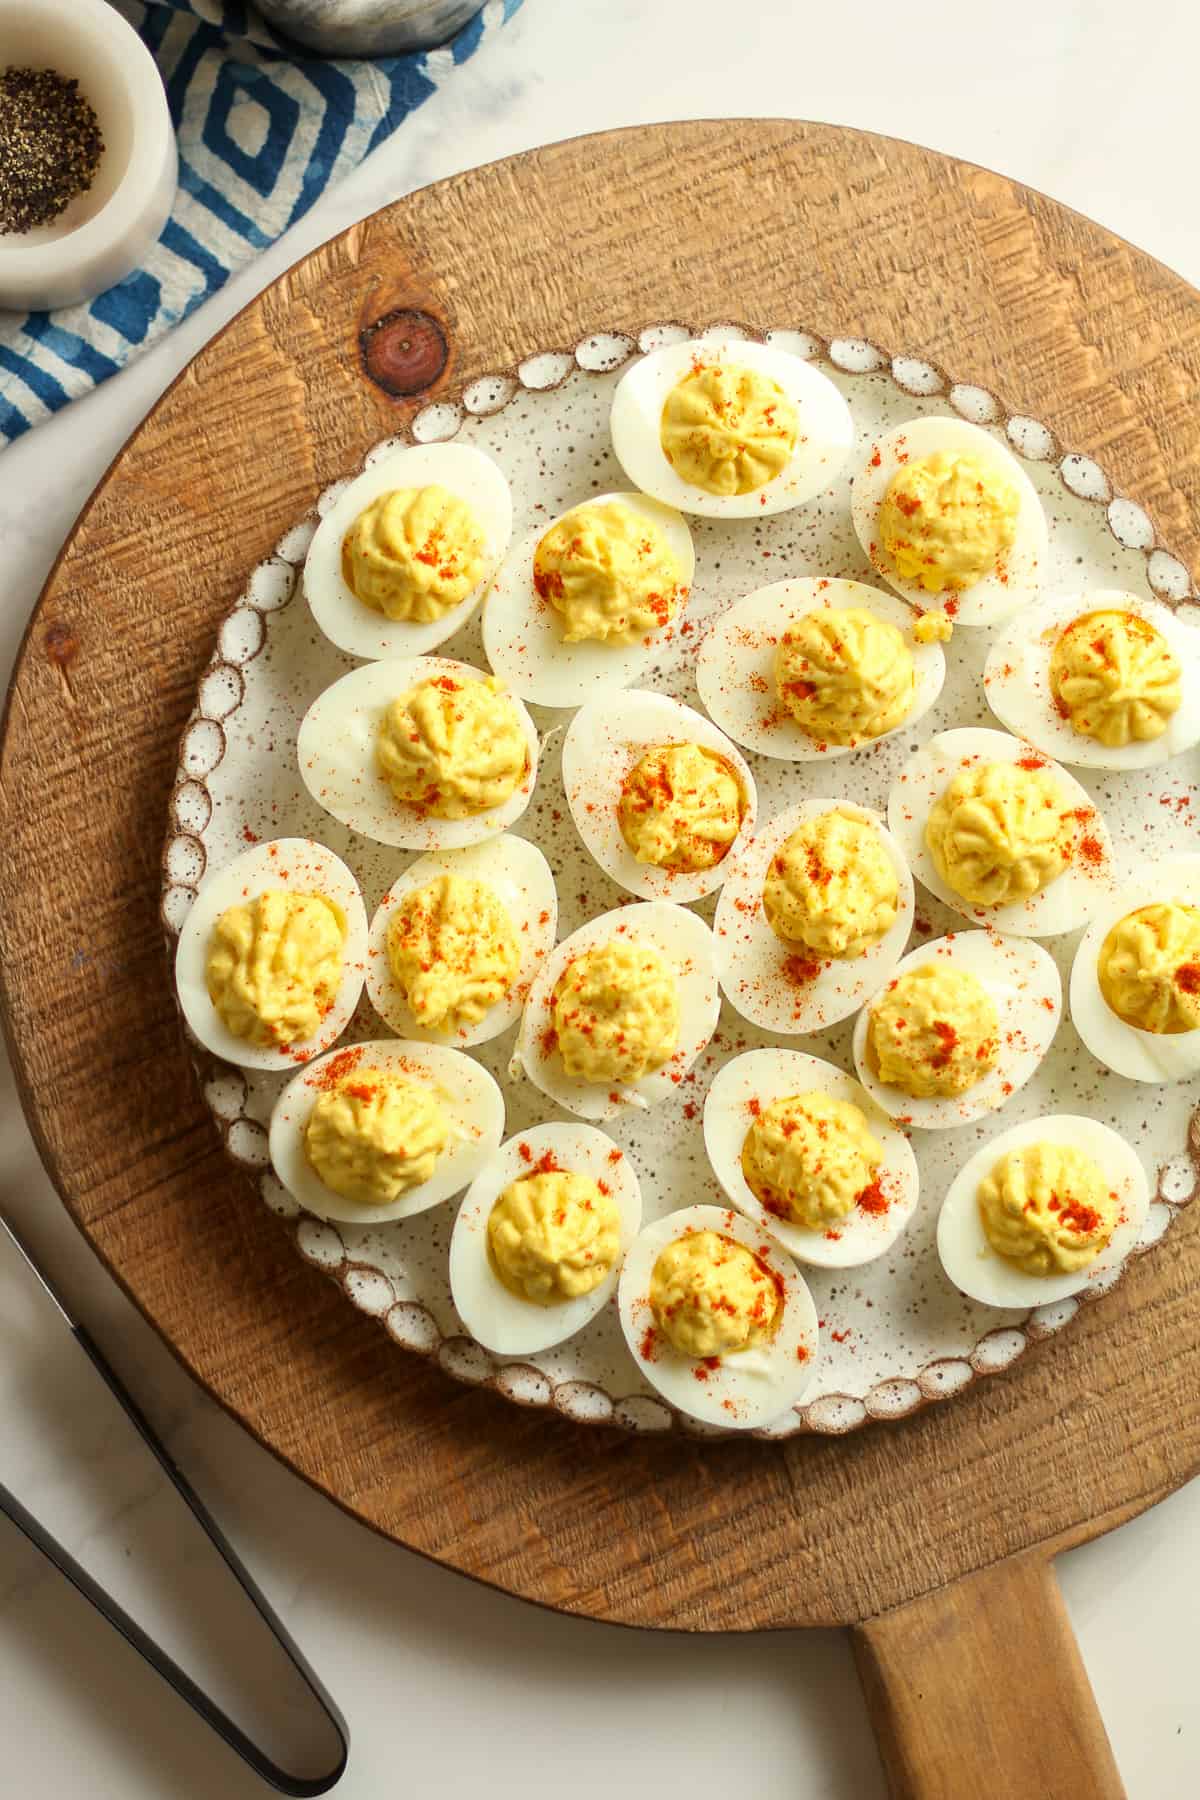 A plate on a wooden board with classic deviled eggs with apple cider vinegar.